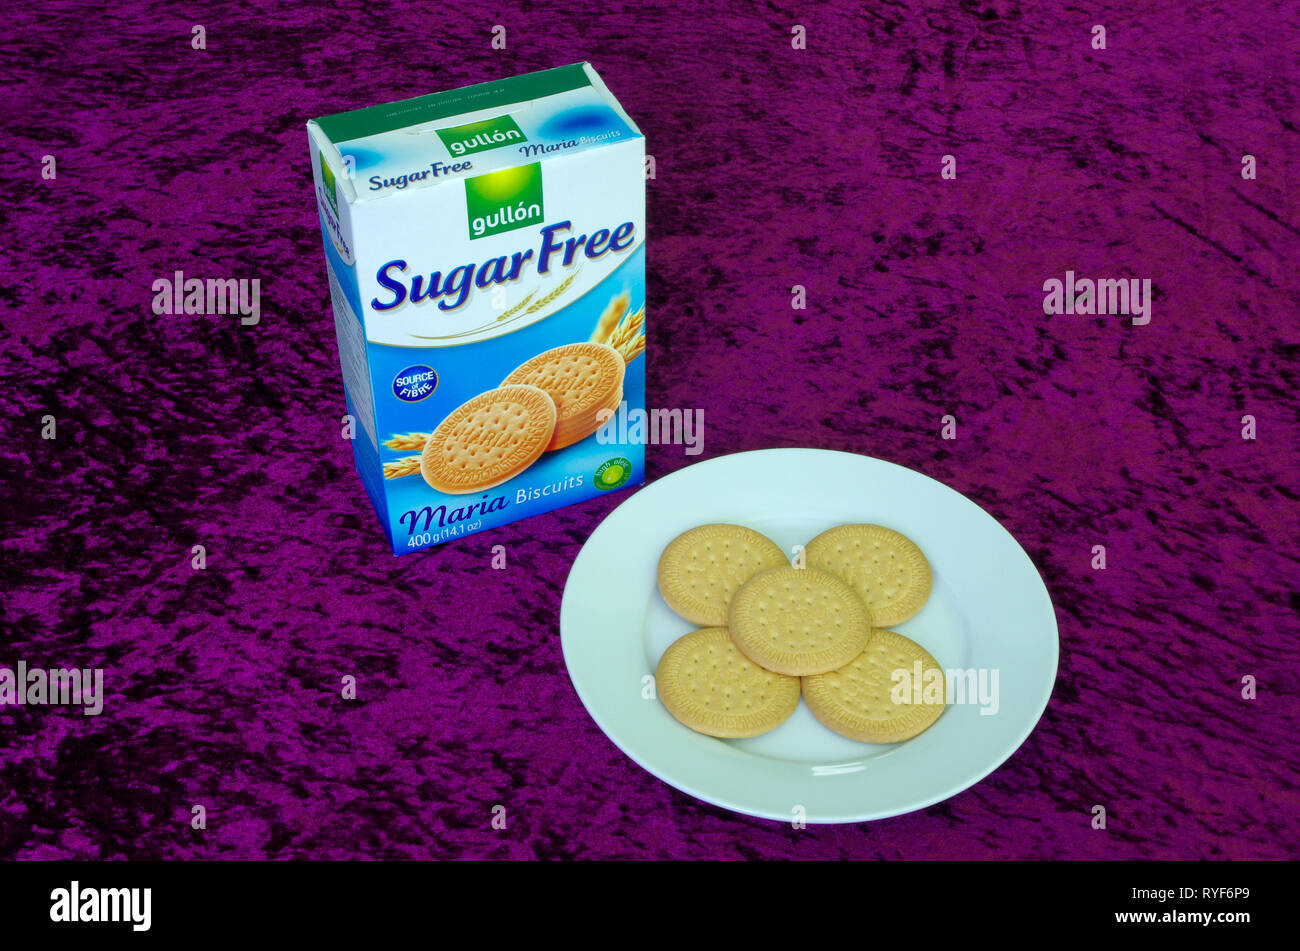 Gullon Sugar Free Maria or Marie Biscuits or Cookies Suitable for Diabetics Stock Photo